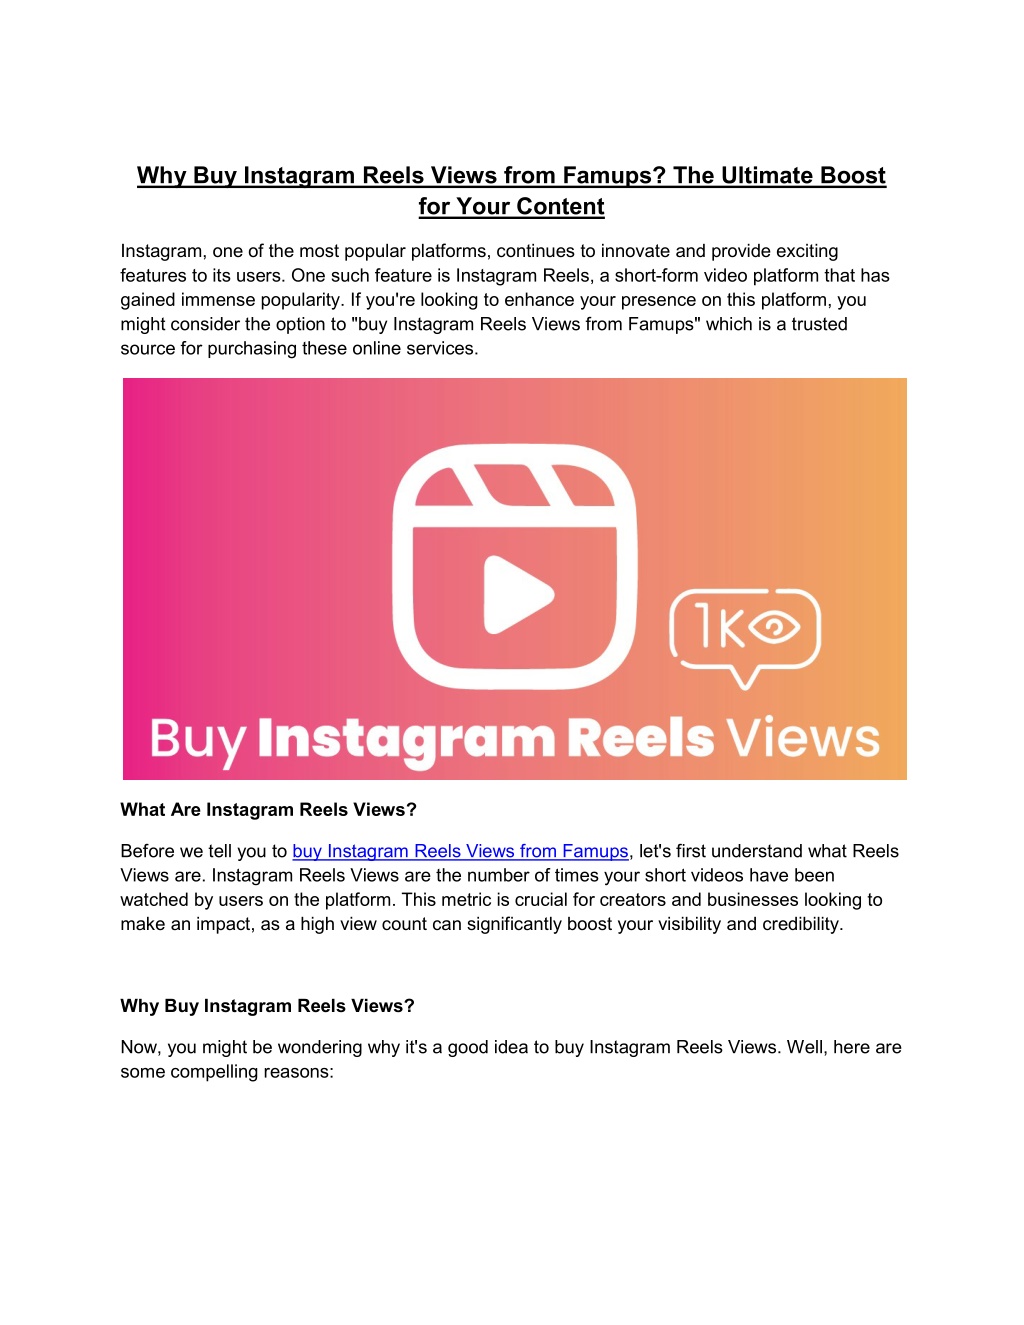 PPT - Why Buy Instagram Reels Views from Famups PowerPoint